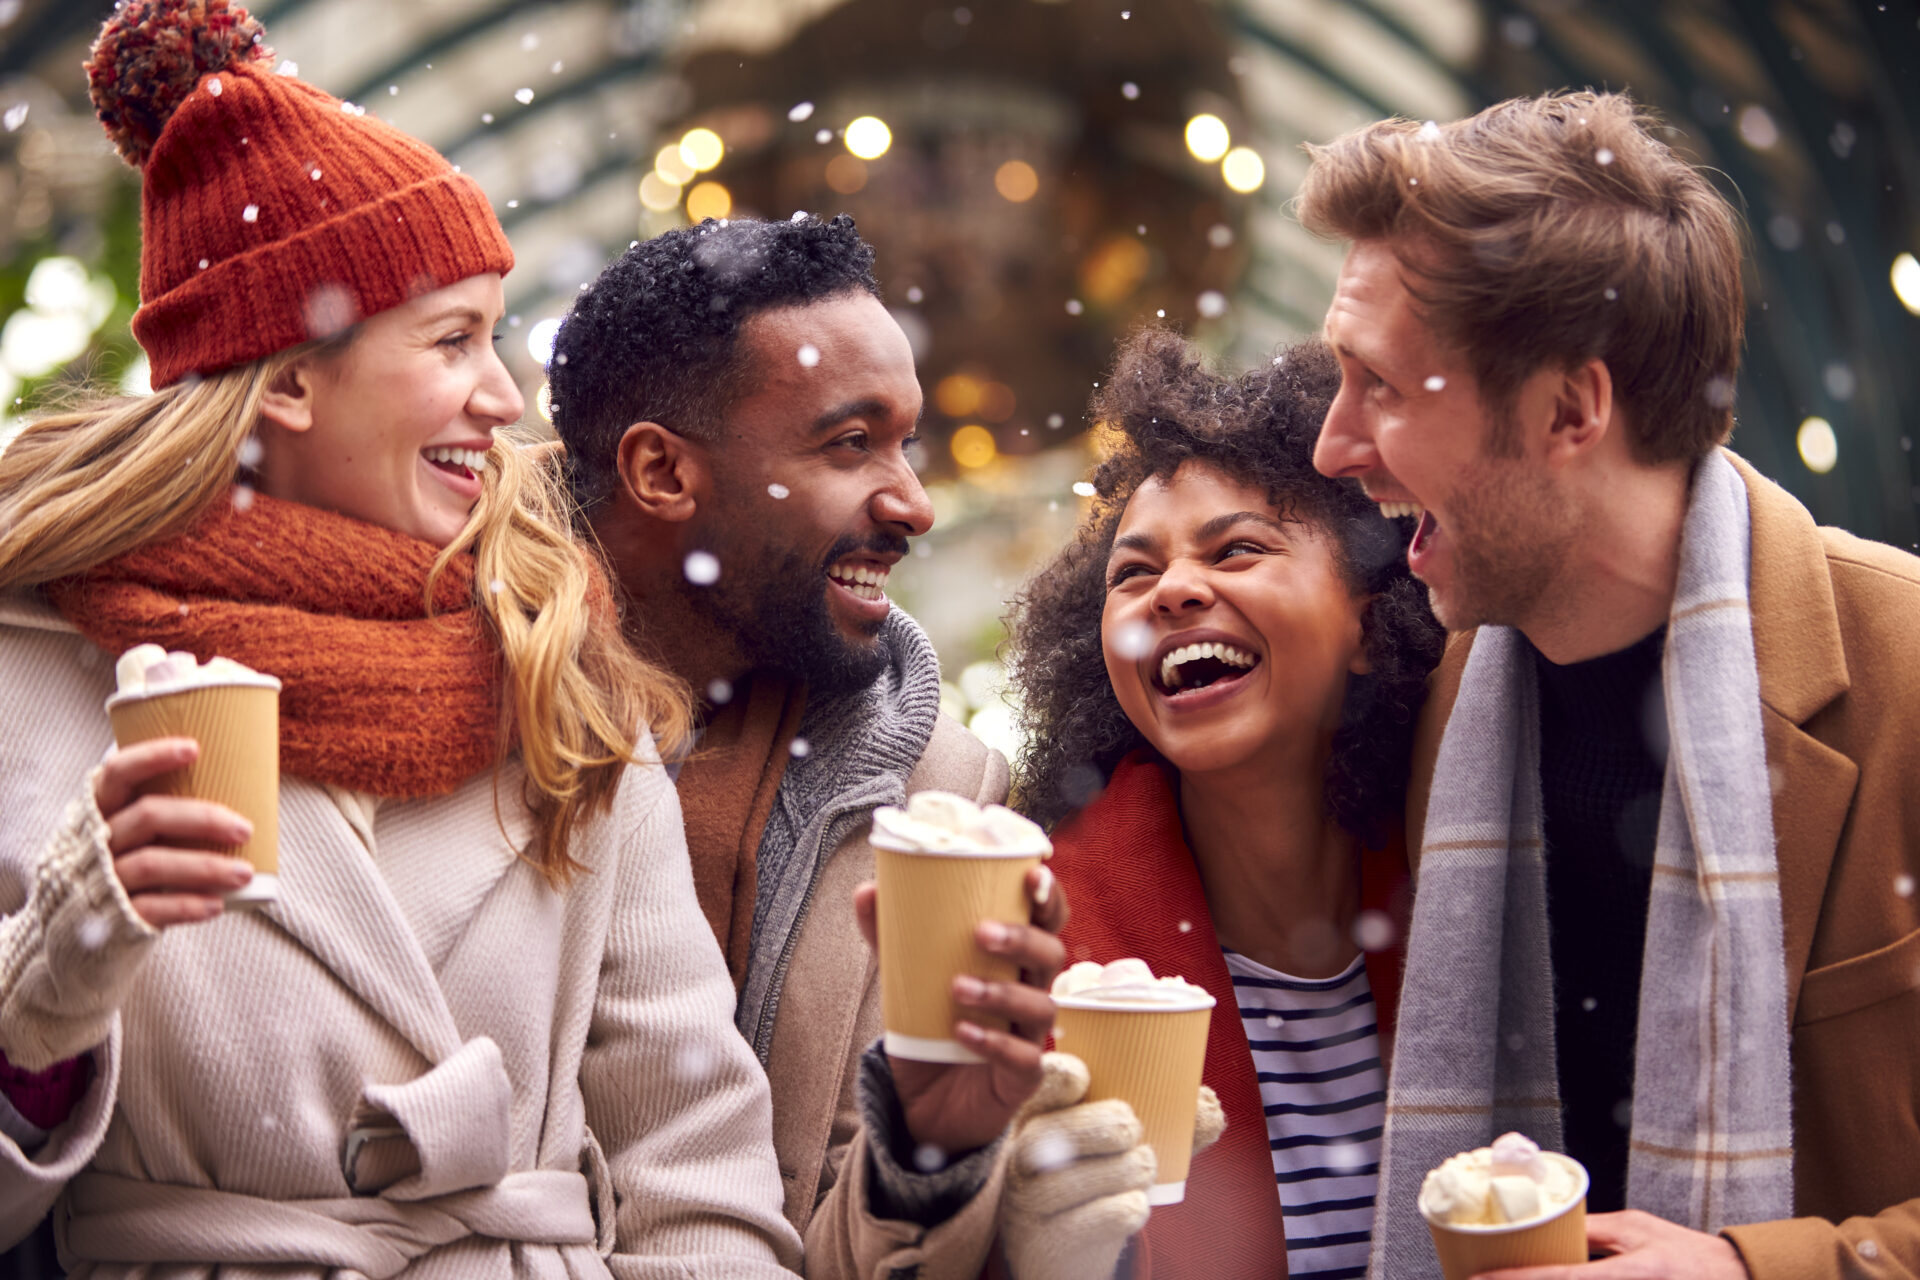 Group Of Friends Drinking Hot Chocolate With Marshmallows In Snow At Outdoor Christmas Market